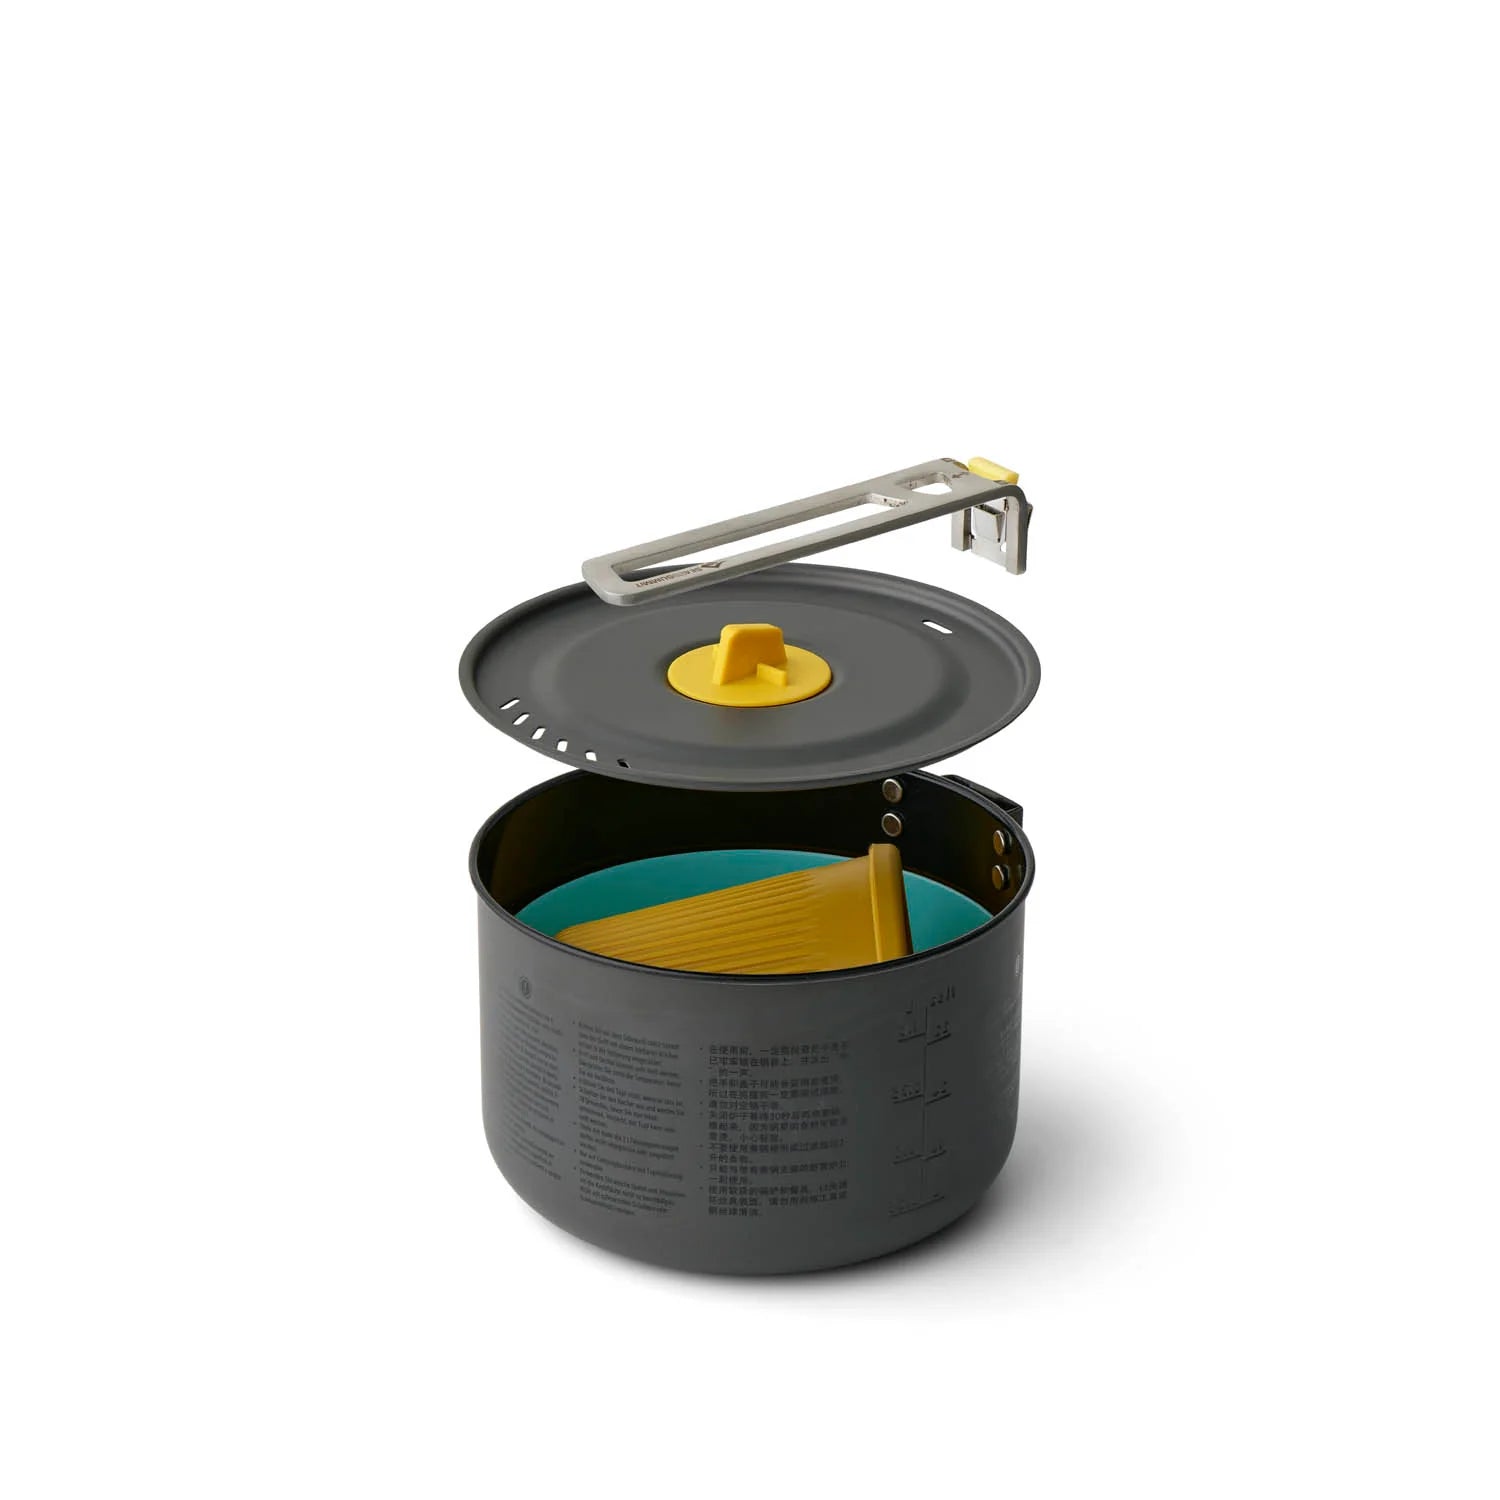 Sea to Summit Frontier UL One Pot Cook Set for 1 - 3 Piece 1.3L Pot with Bowl and Cup -  - Mansfield Hunting & Fishing - Products to prepare for Corona Virus